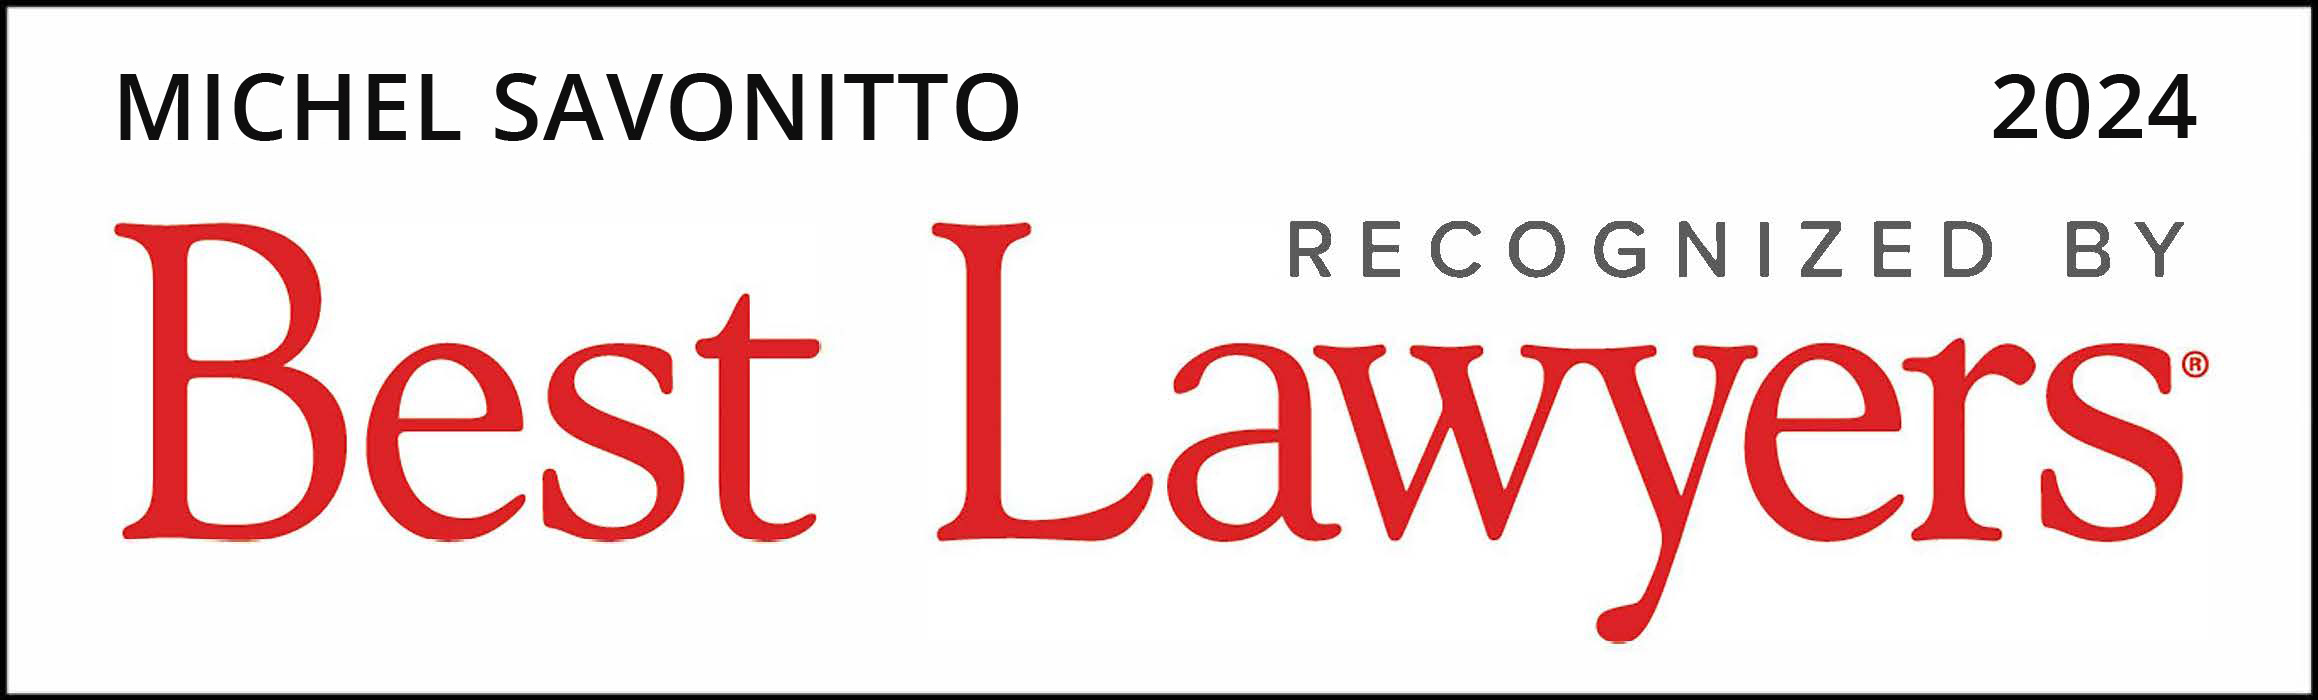 Michel Savonitto was included in the 2021 Edition of The Best Lawyers in Canada©